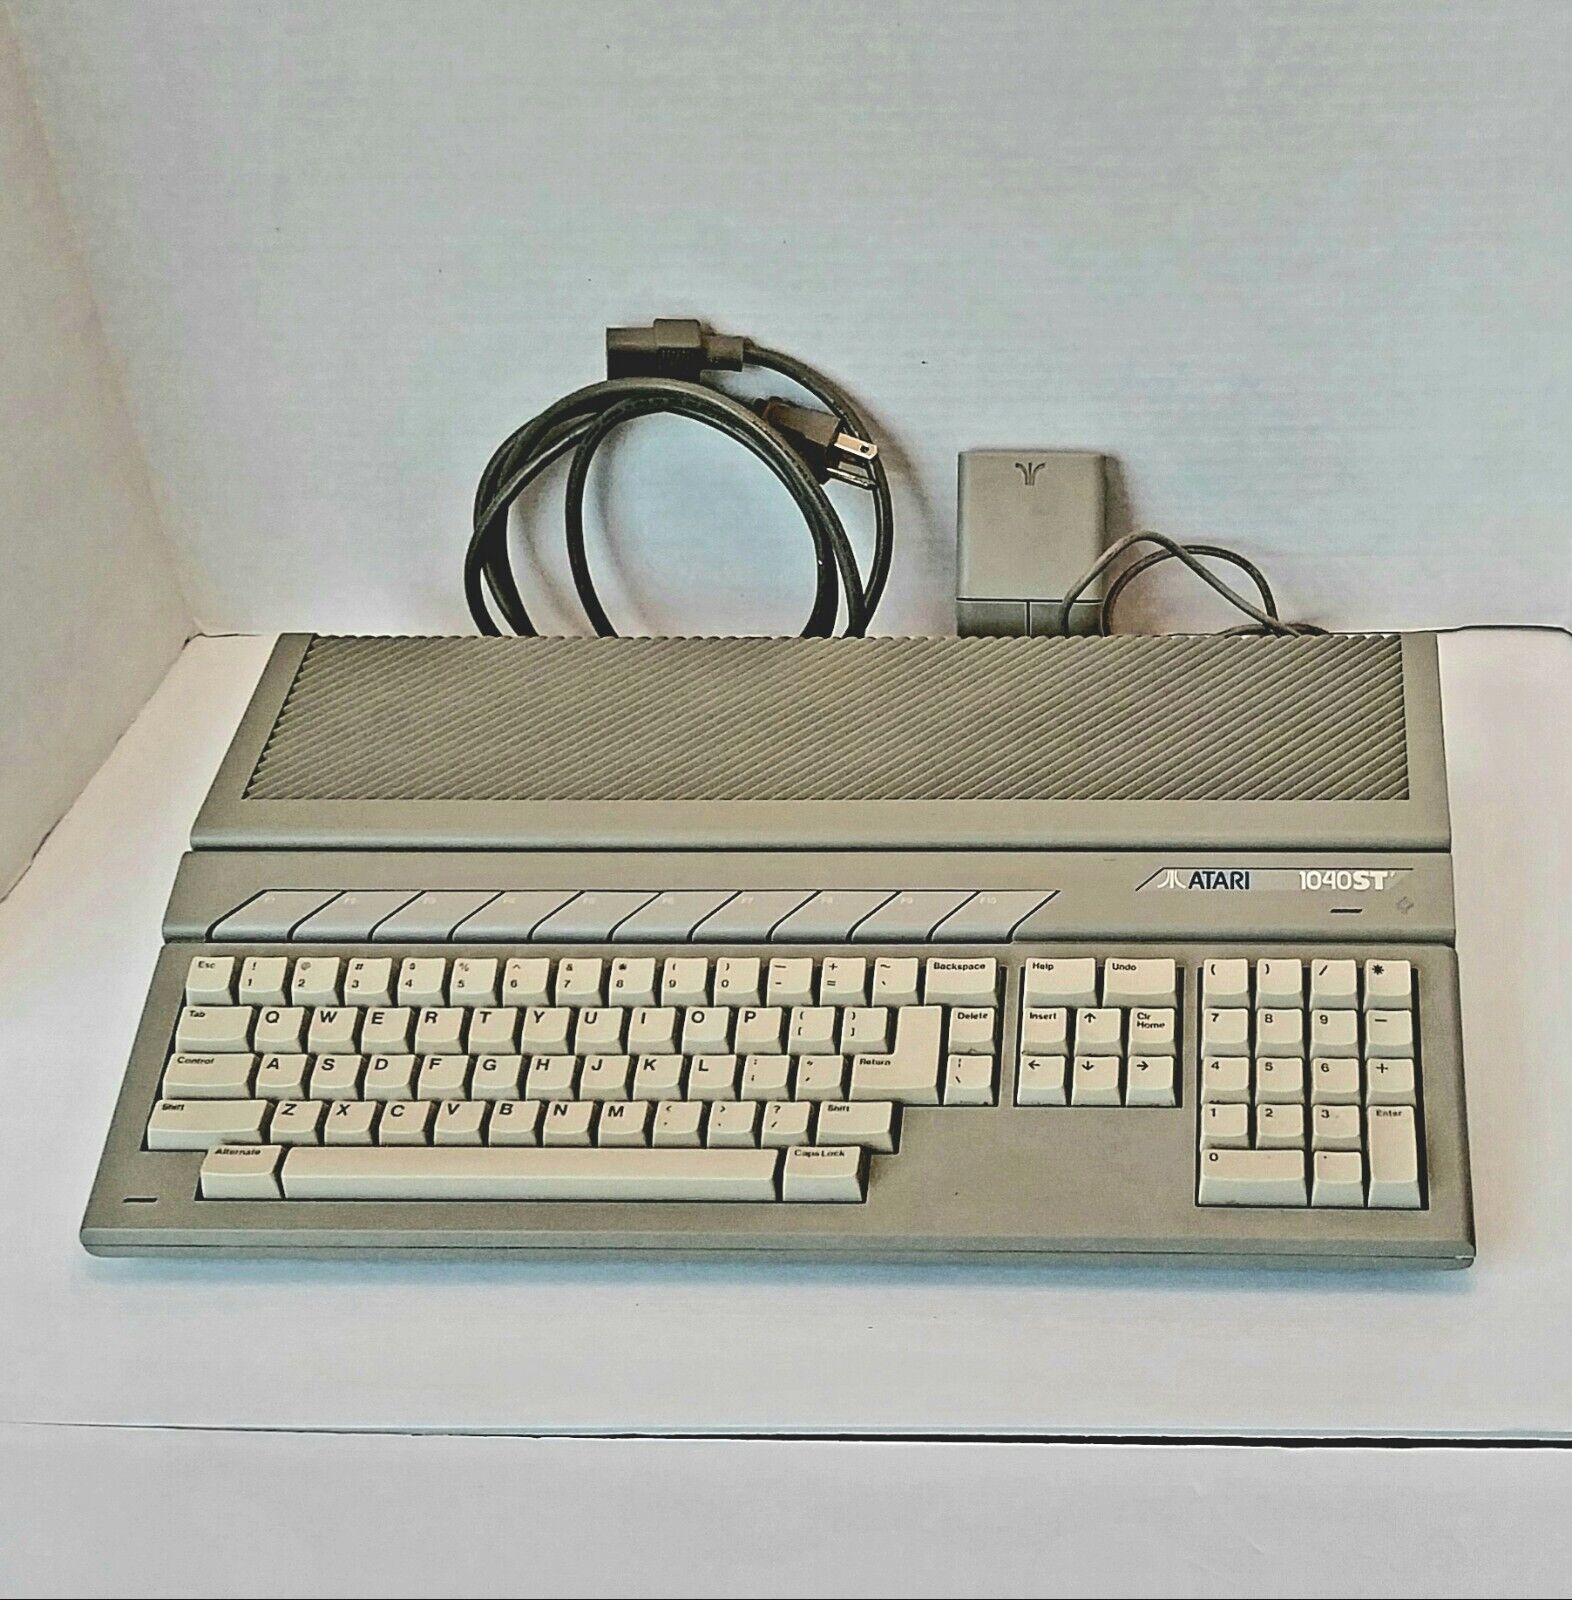 Atari 1040 STf Computer w/ mouse and power cord